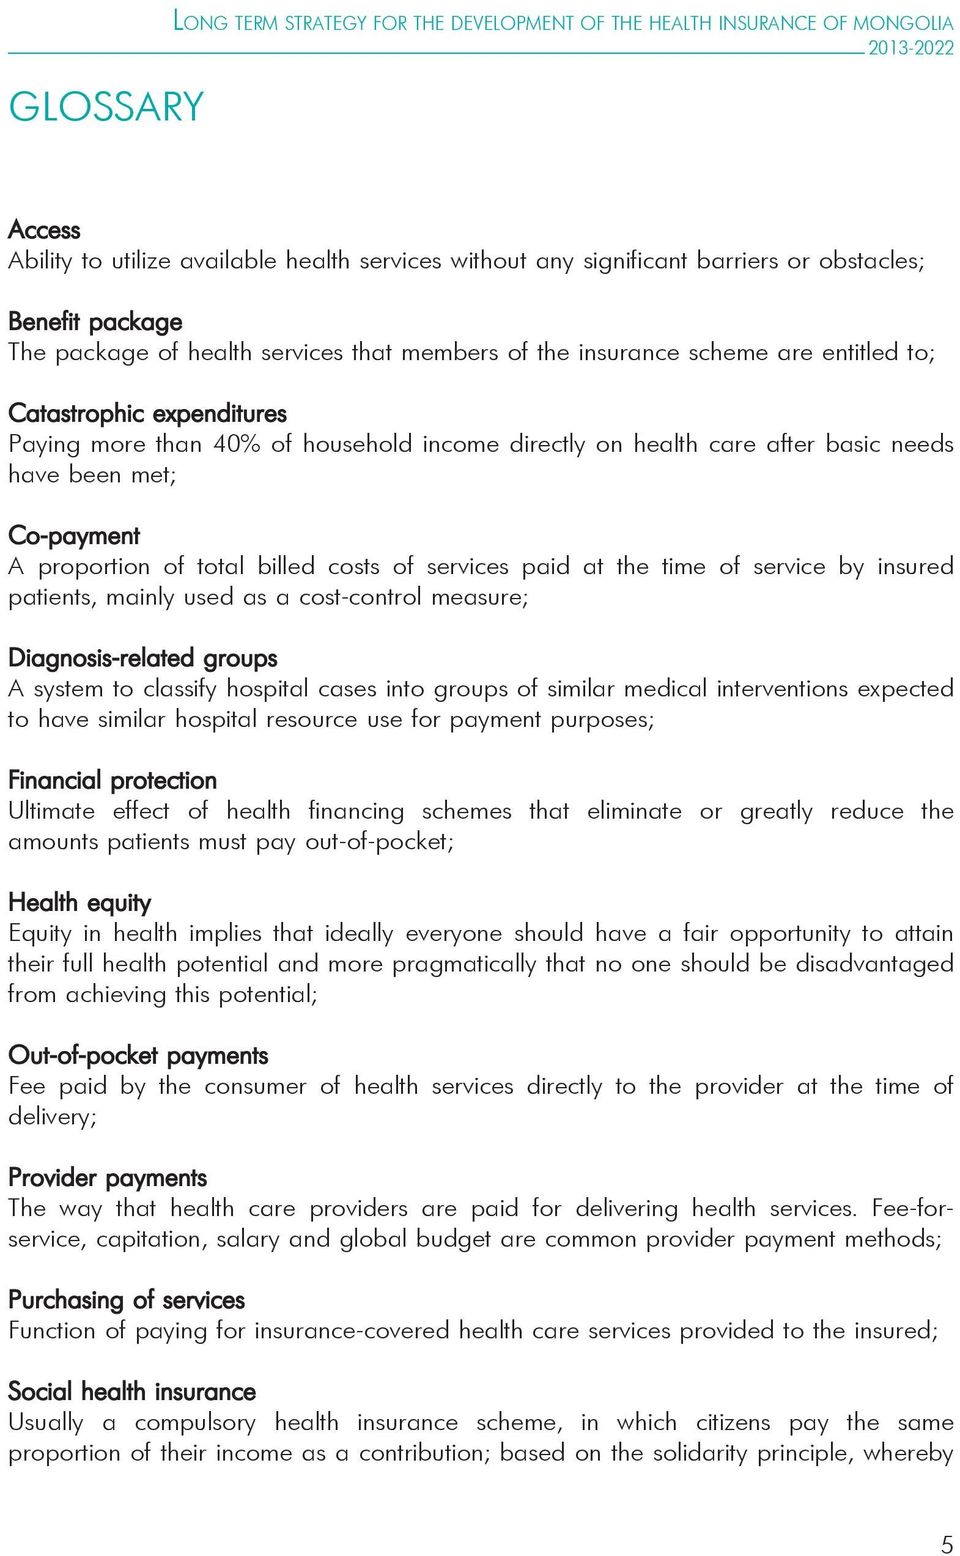 been met; Co-payment A proportion of total billed costs of services paid at the time of service by insured patients, mainly used as a cost-control measure; Diagnosis-related groups A system to